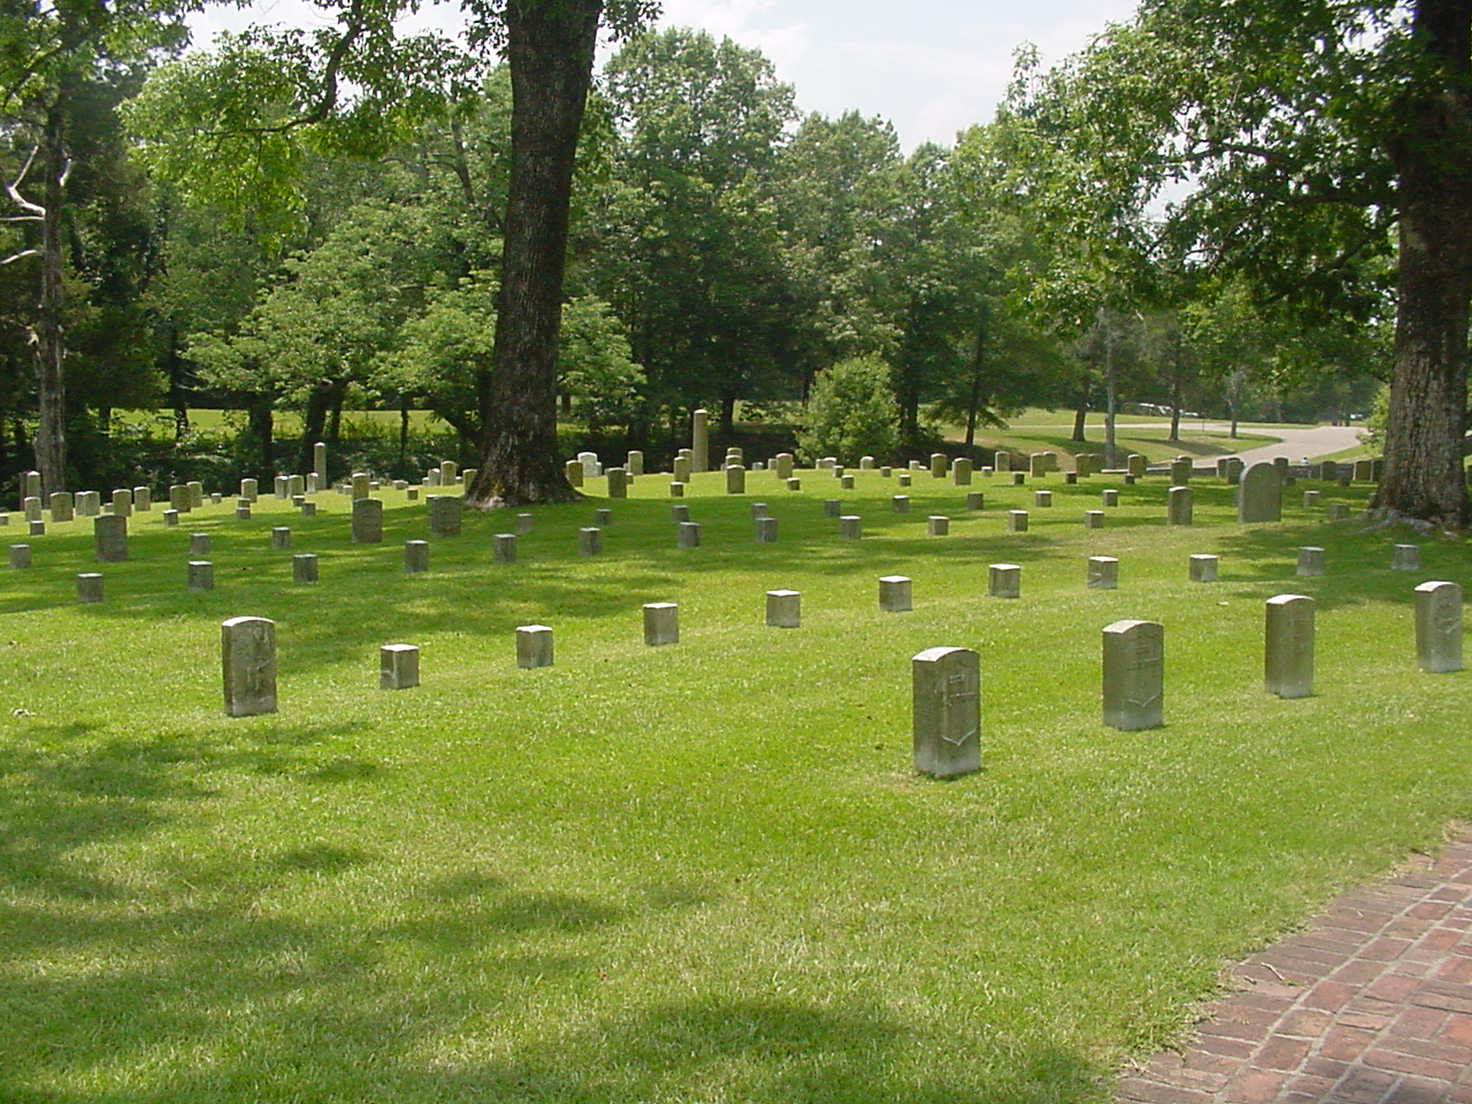 The smaller markers are for those soldiers who are not identified.  Sadly, this would be the majority of those buried at Shiloh.